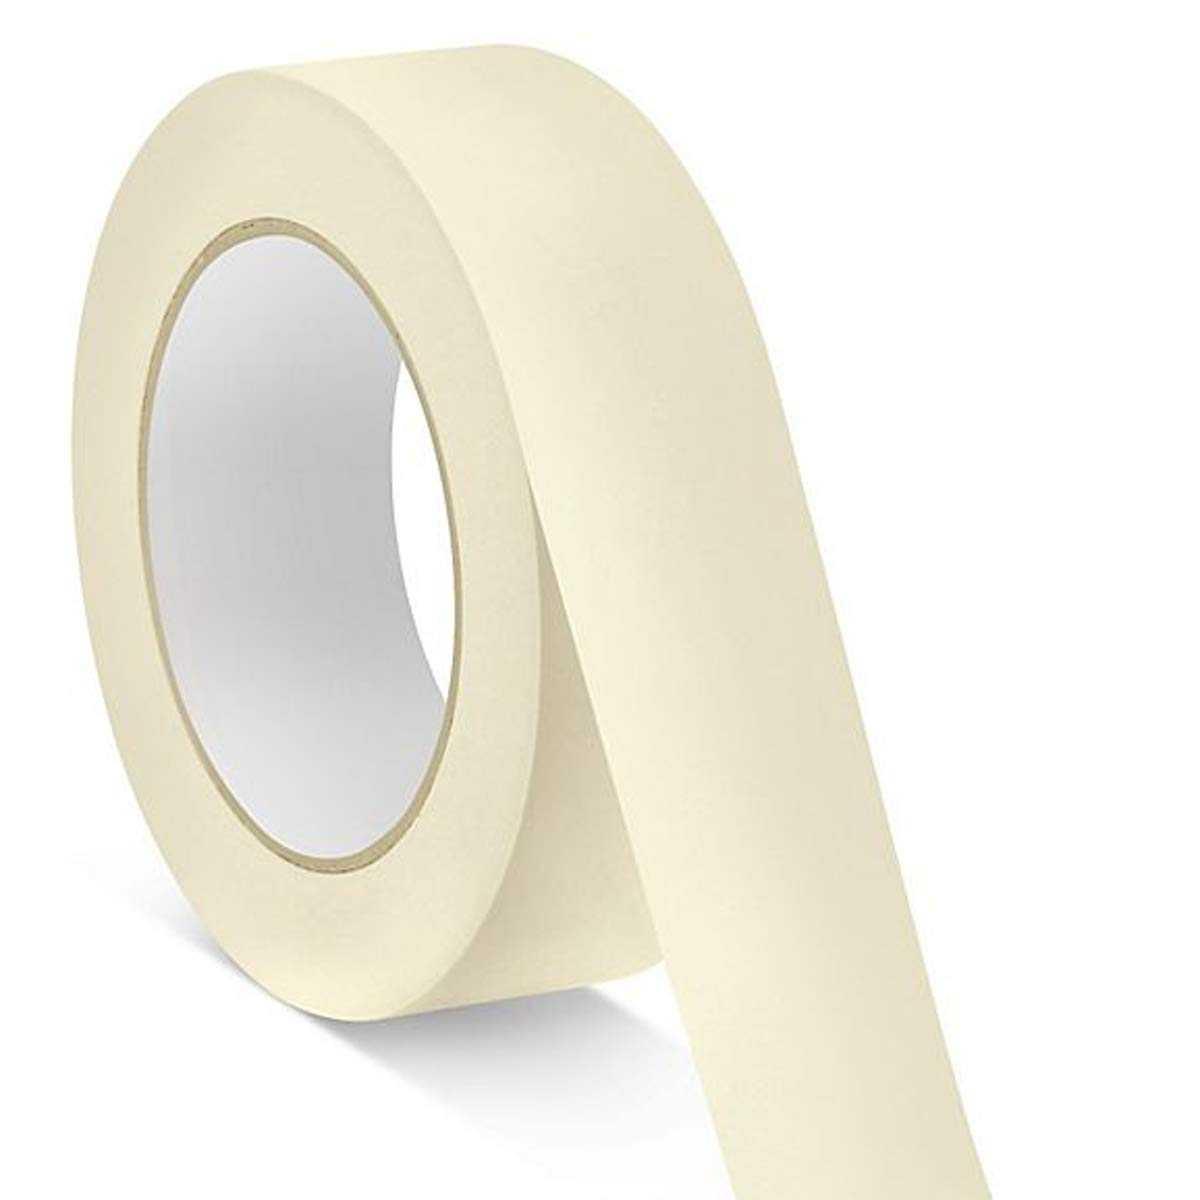 Alpha Masking Tape 2.5 x 30 cm - Karout Online -Karout Online Shopping In lebanon - Karout Express Delivery 